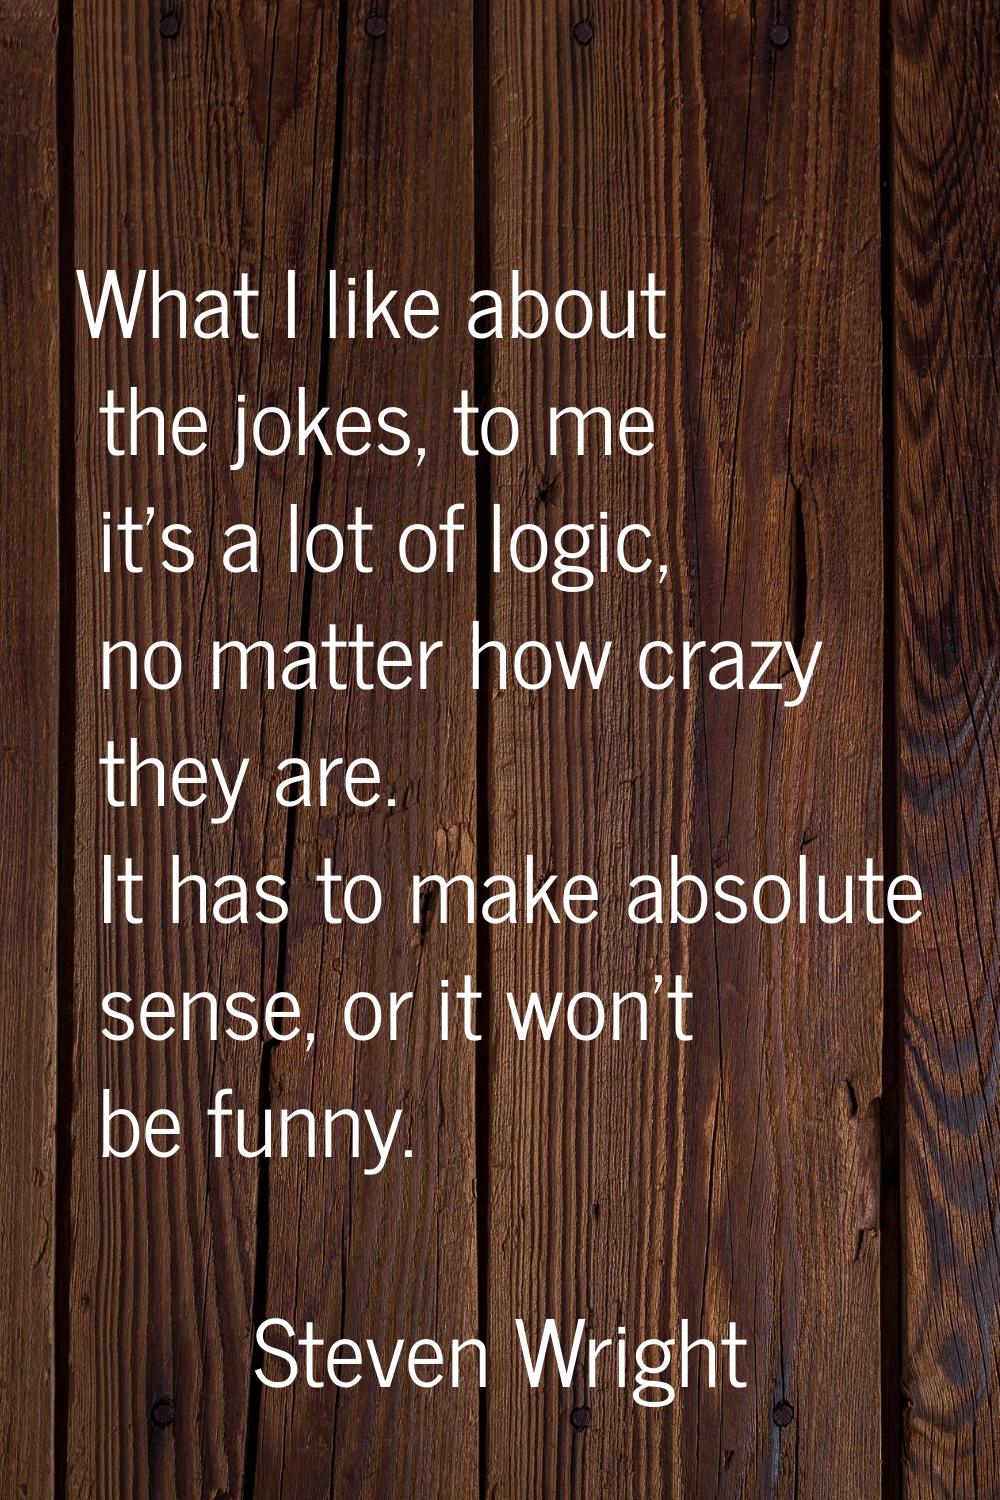 What I like about the jokes, to me it's a lot of logic, no matter how crazy they are. It has to mak